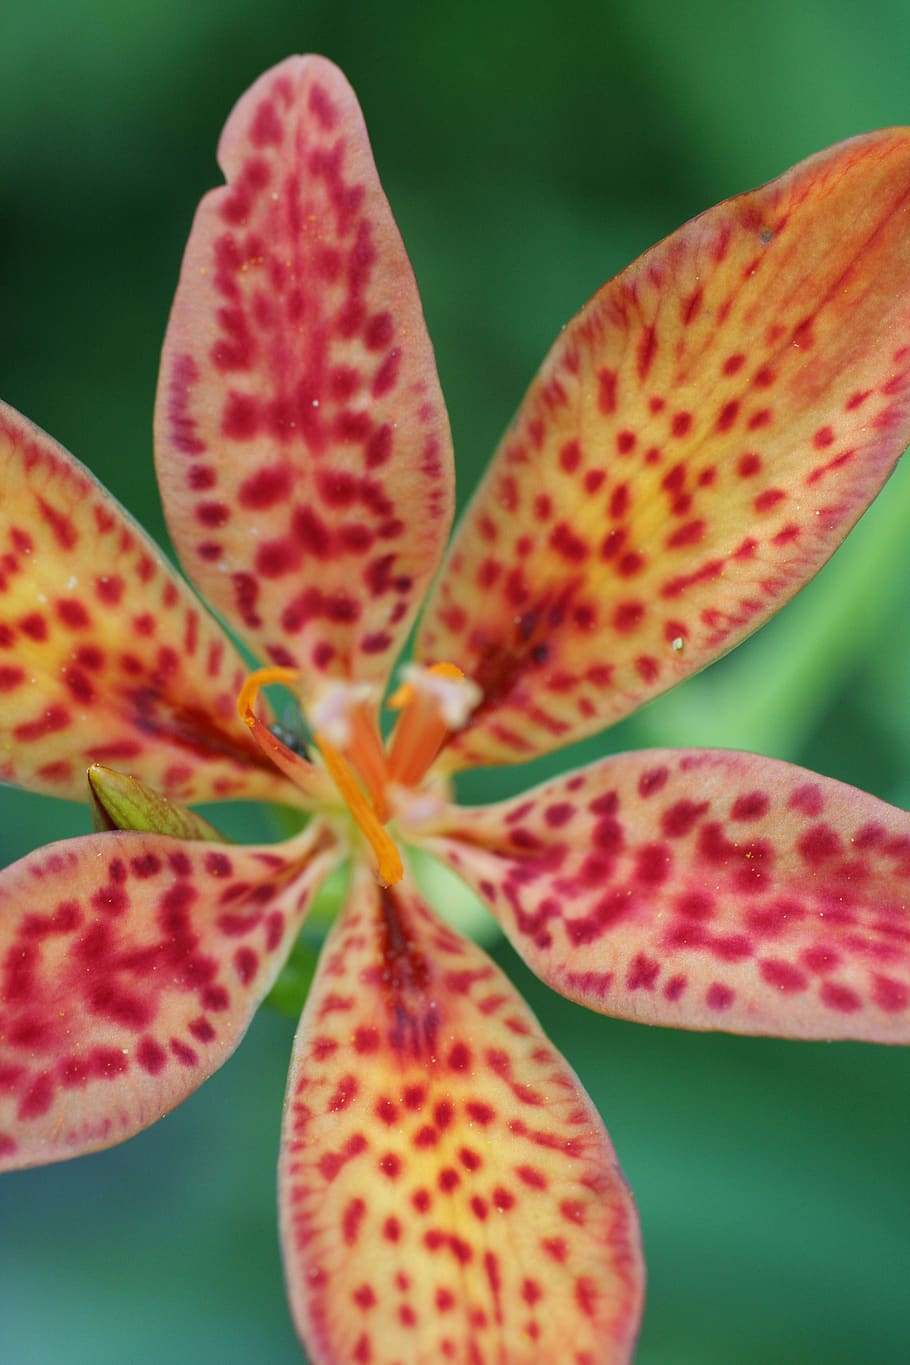 blackberry lily, flower, bloom, garden, nature, speckled, red, yellow, colorful, summer